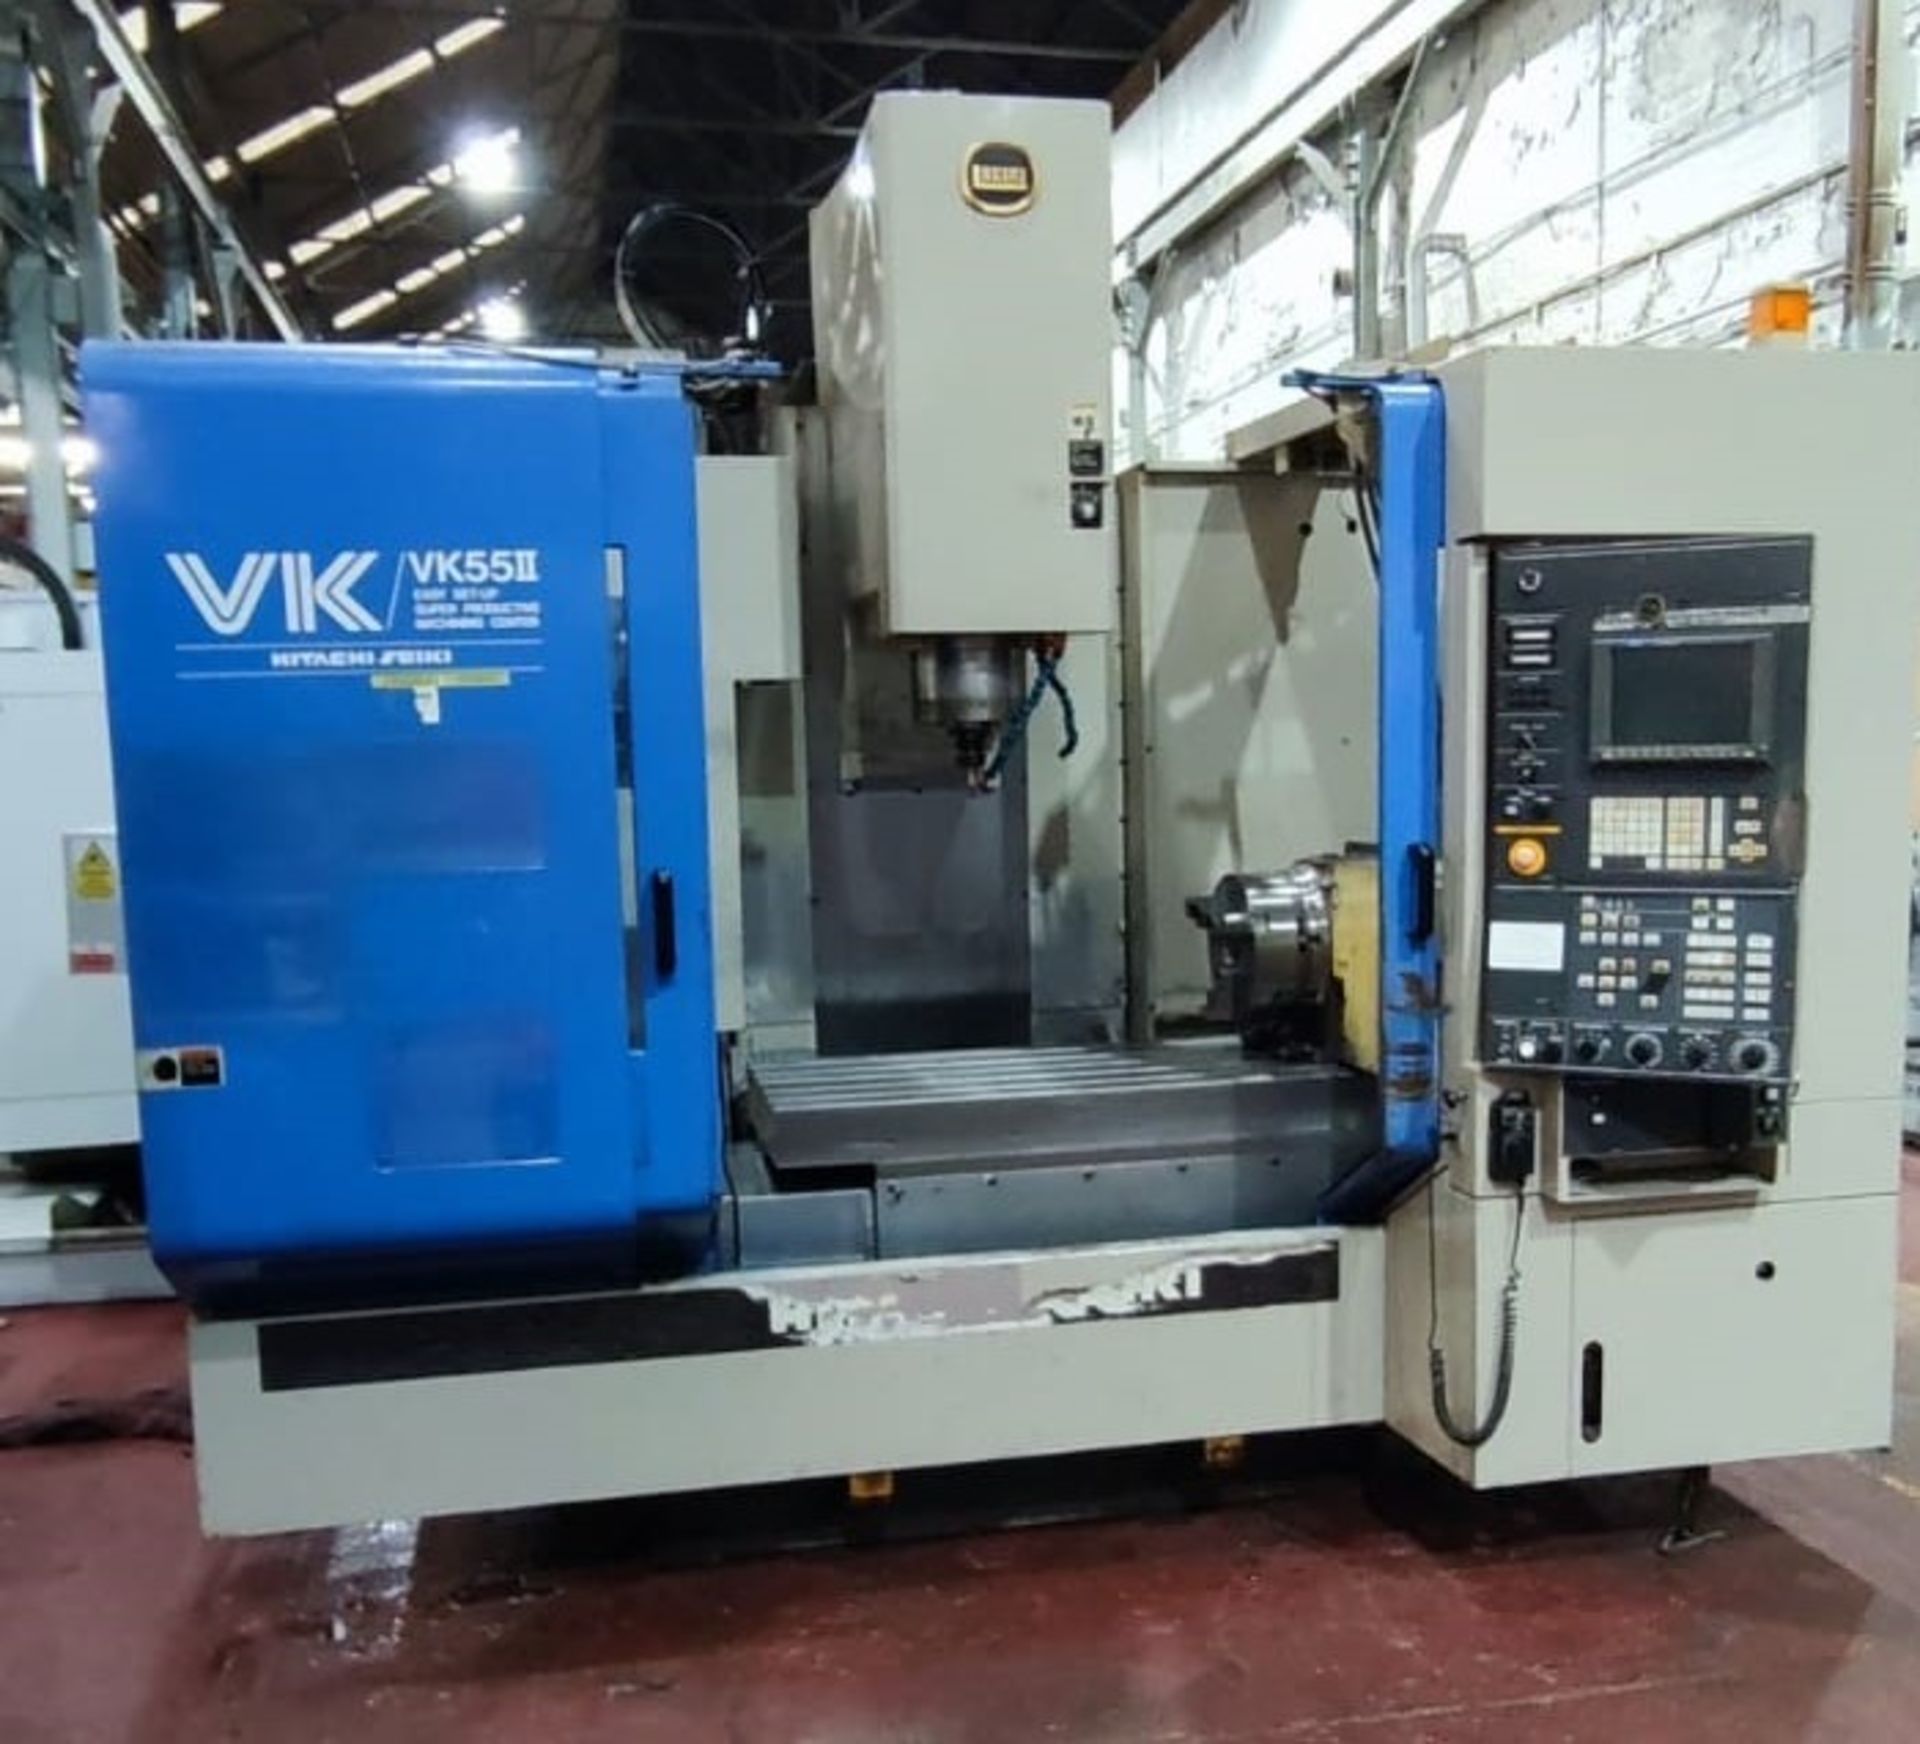 Hitachi Seiki VK 55II Vertical Machining Centre with 4rth axis